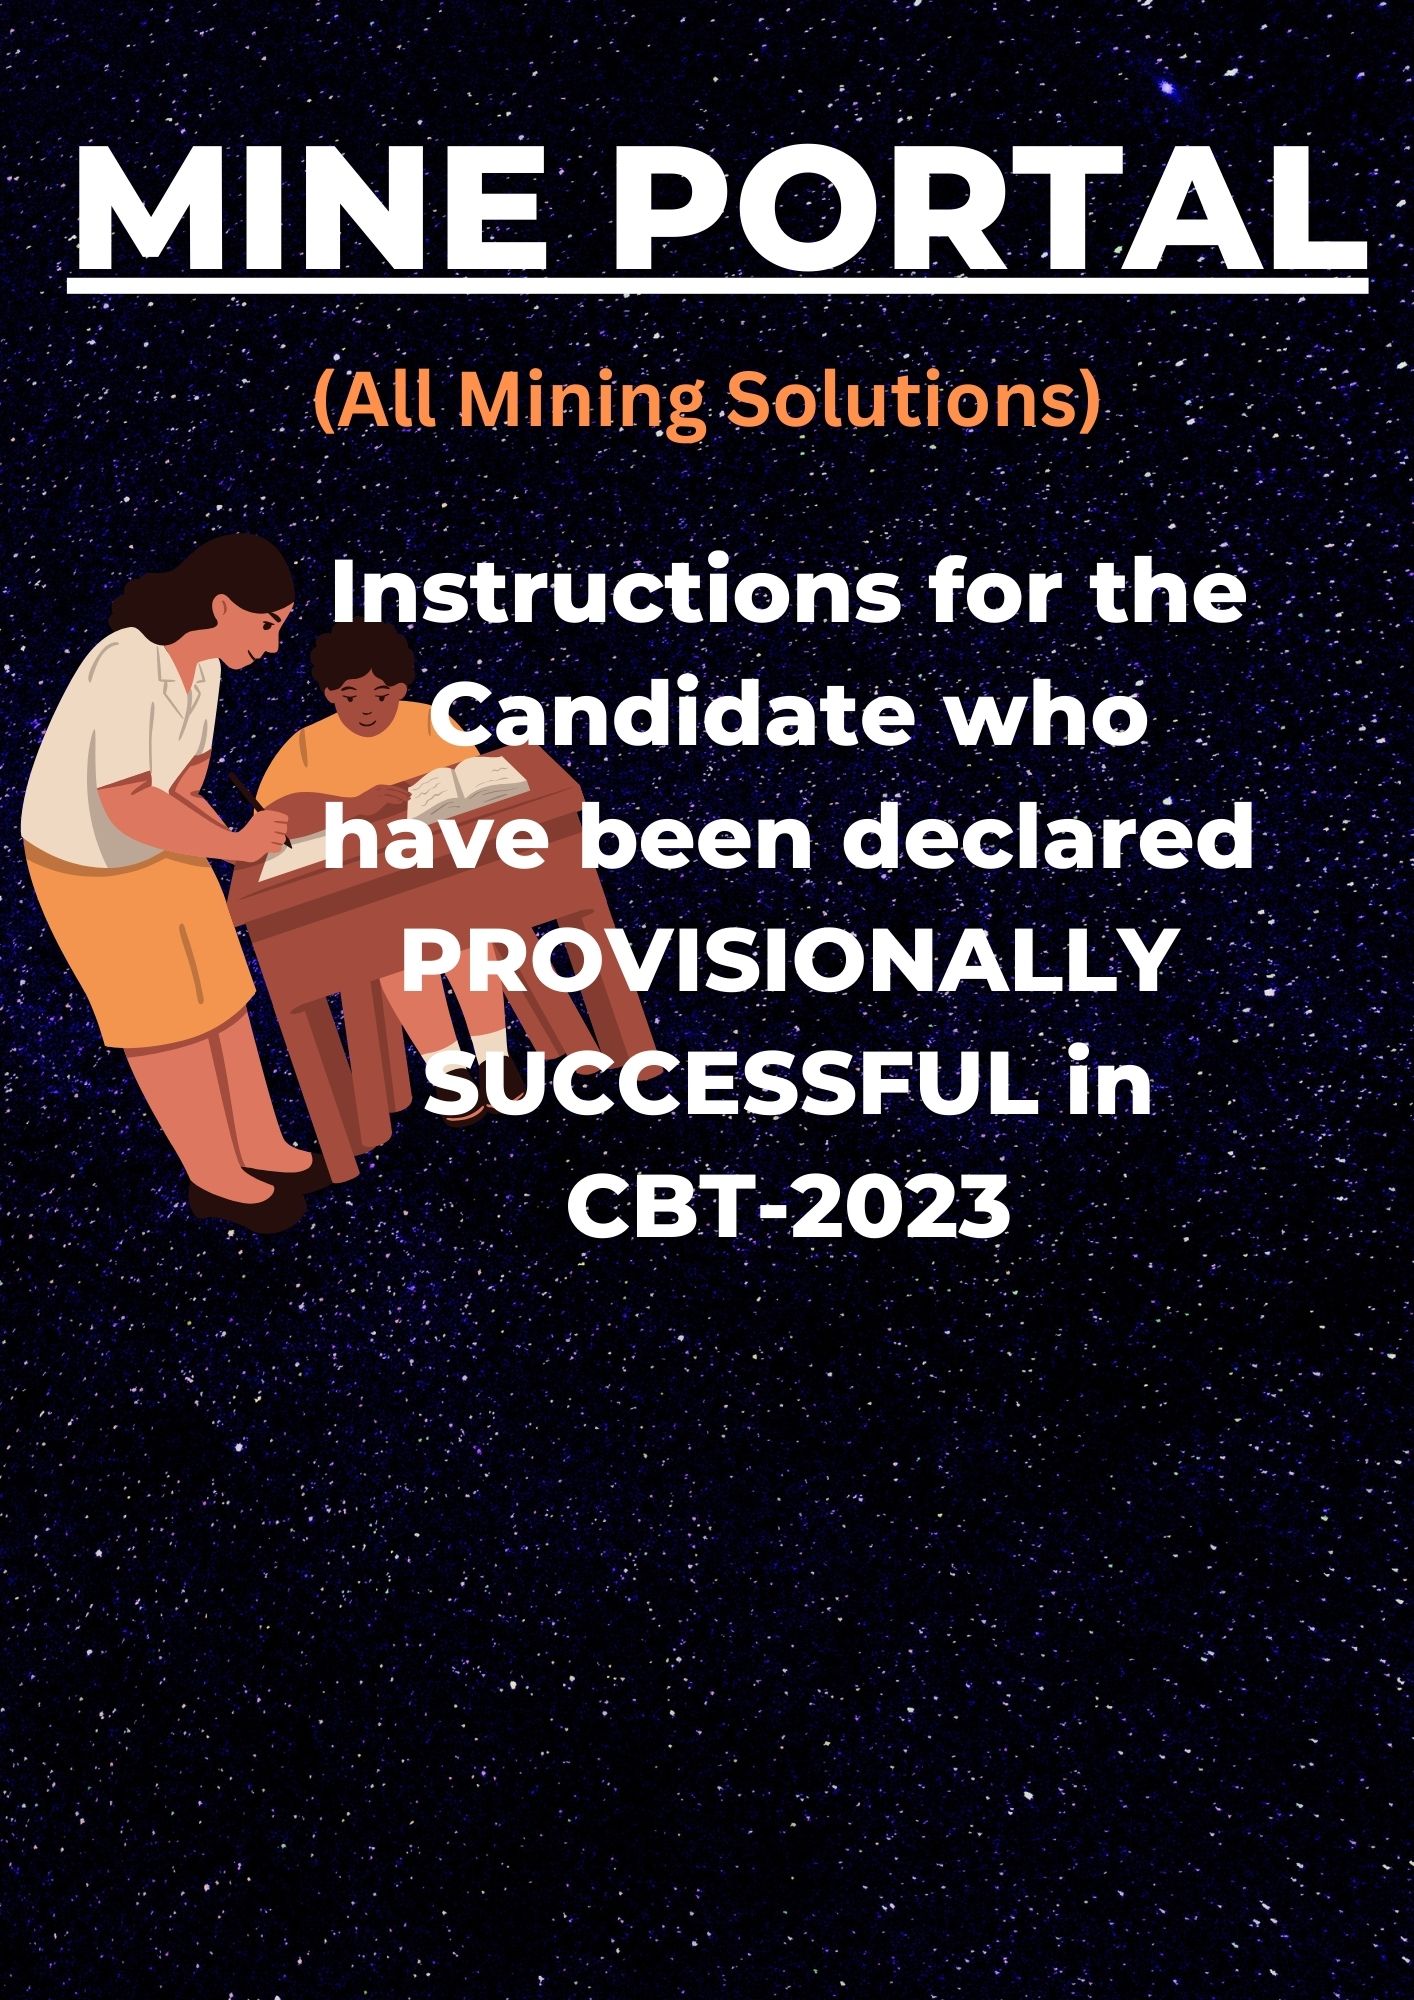 instructions-for-the-candidate-who-have-been-declared-provisionally-successful-in-cbt-2023